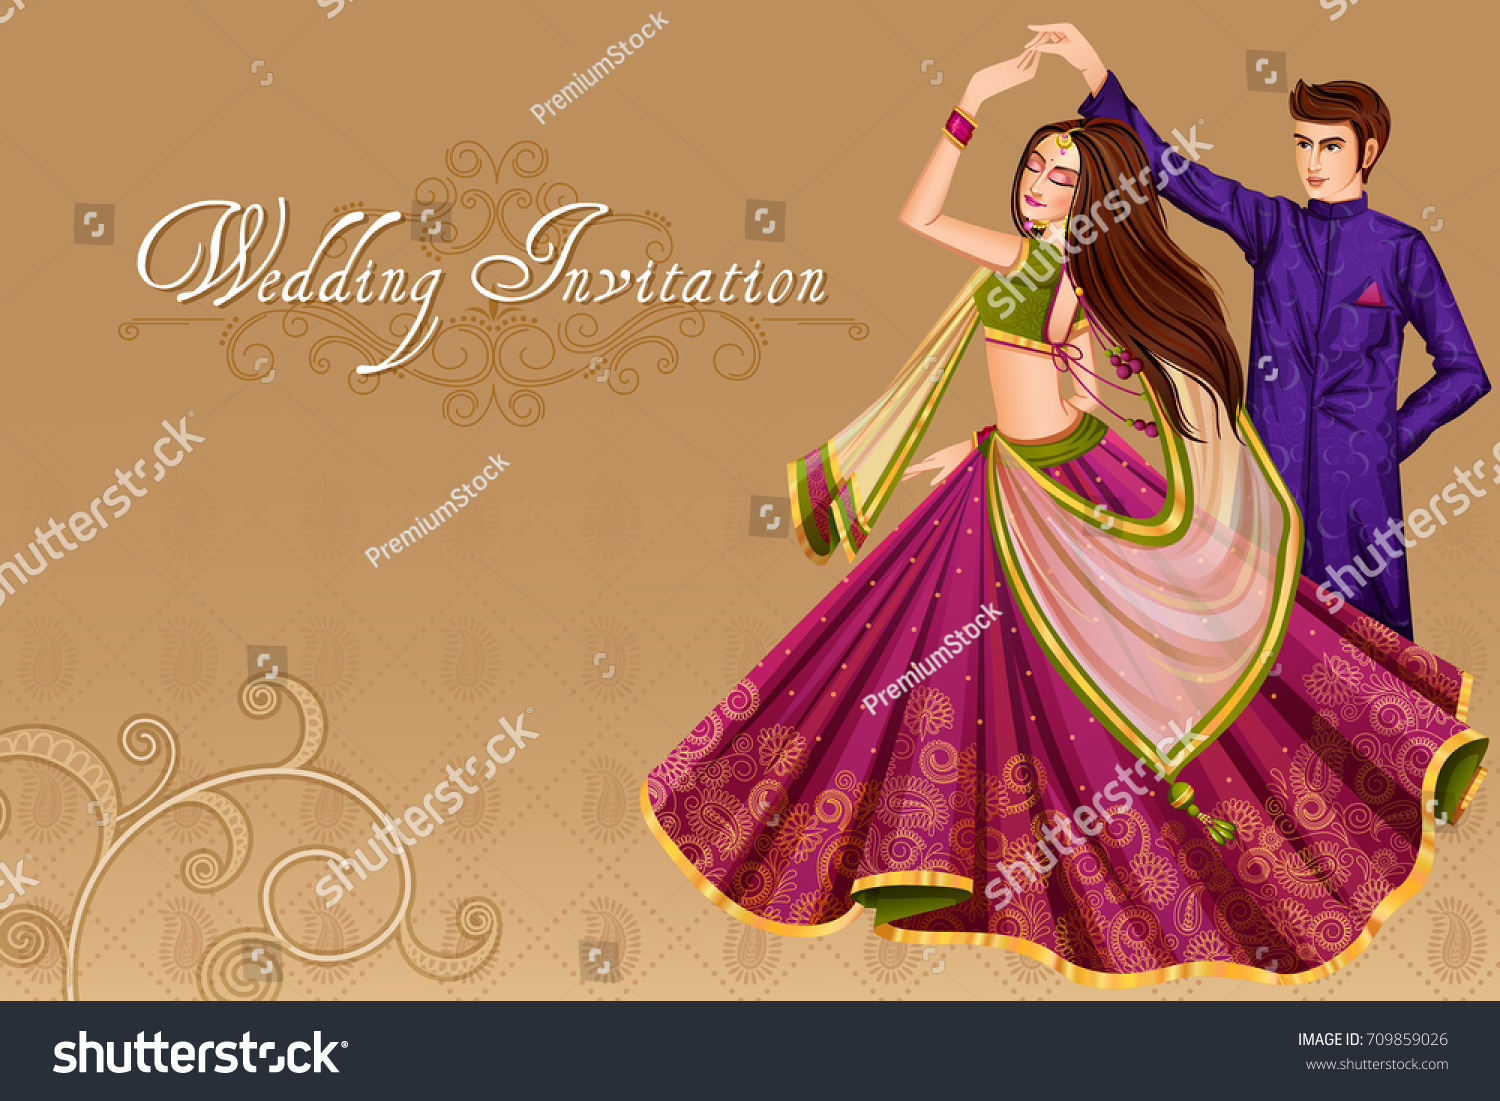 SVG of Vector design of Indian couple dancing in wedding Sangeet ceremony of India svg